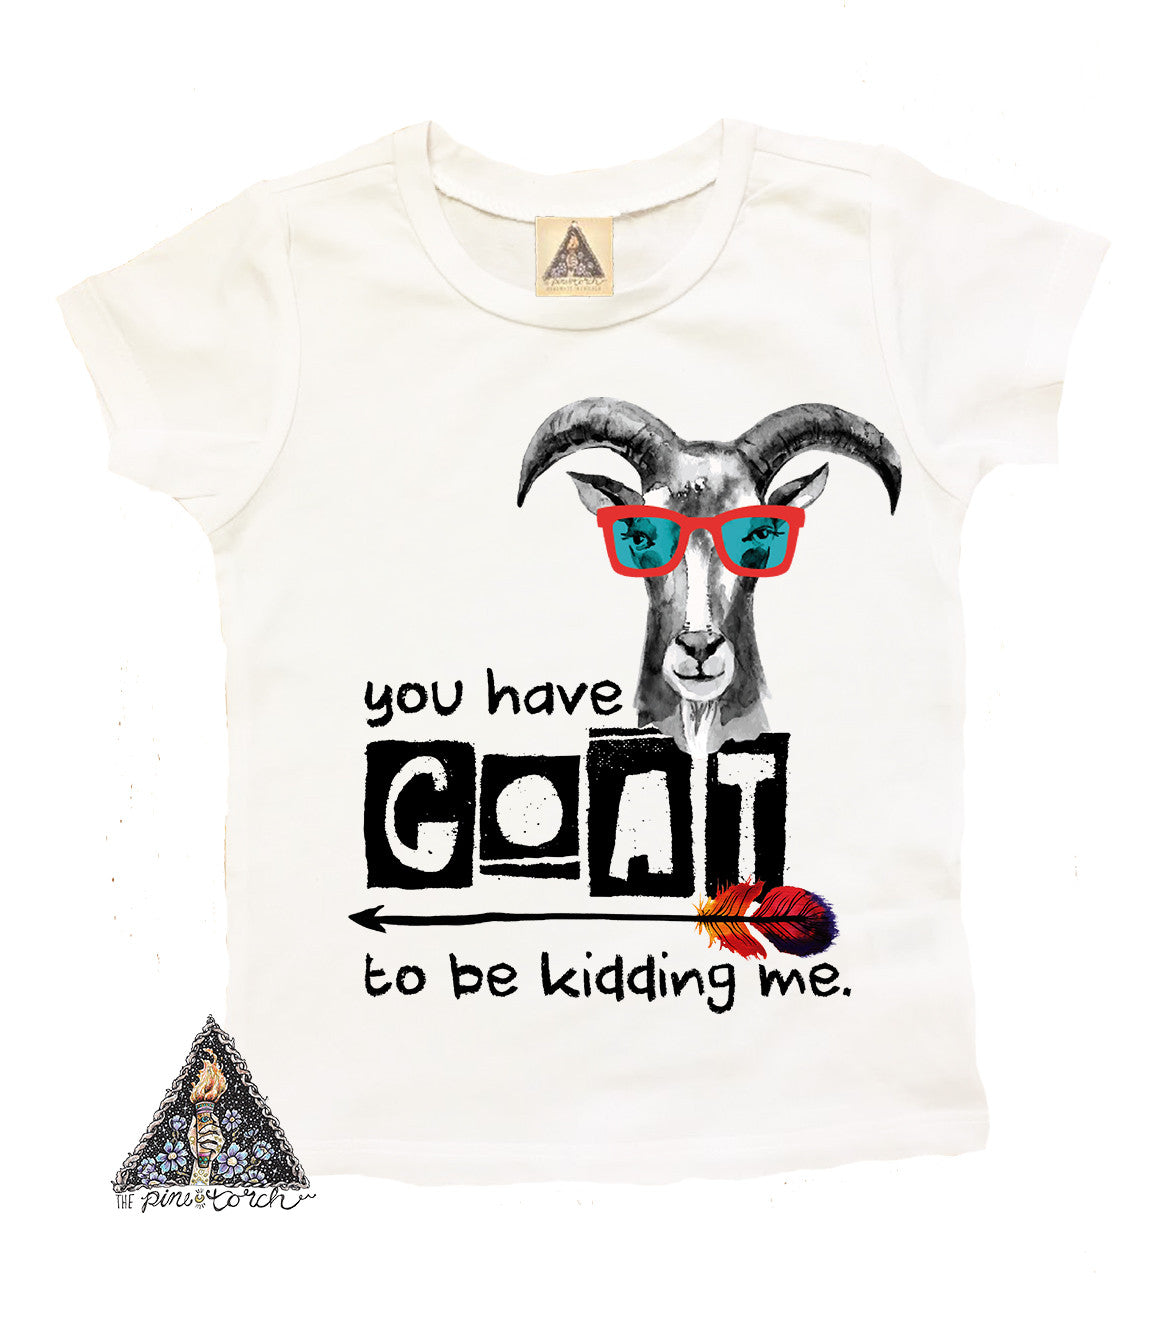 « YOU HAVE GOAT TO BE KIDDING ME » KID'S TEE